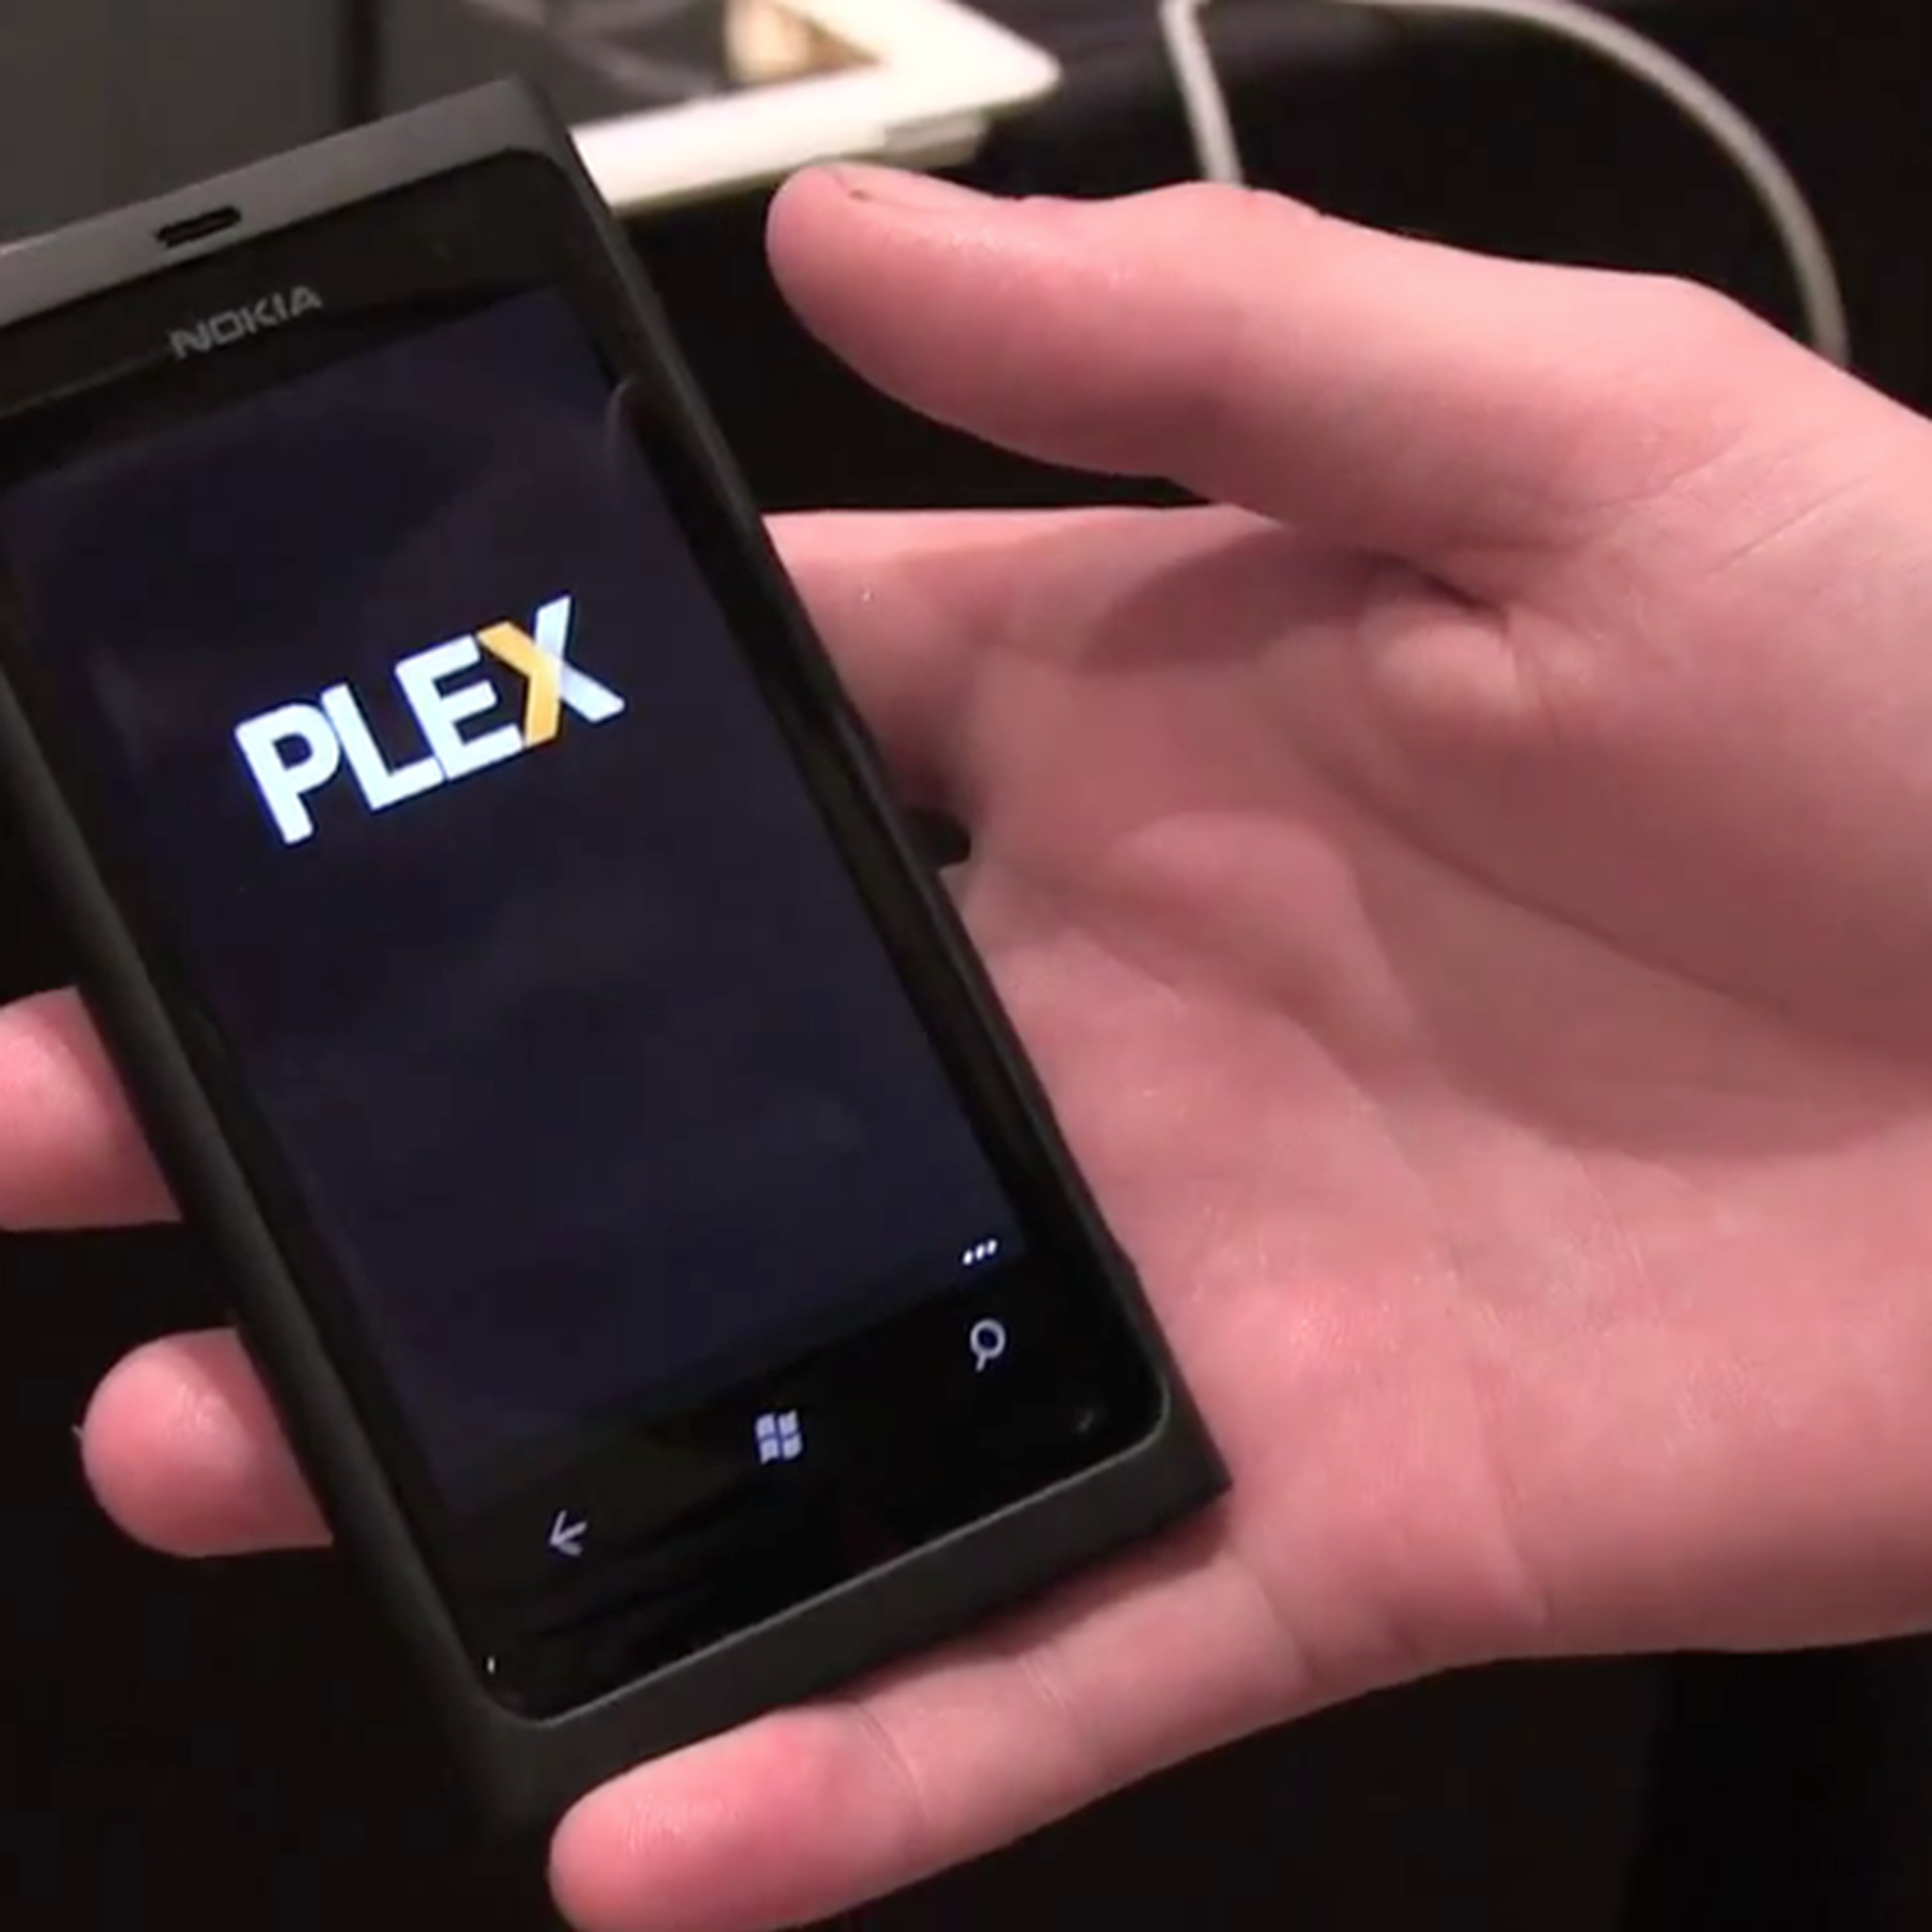 New Plex support for Windows Phone and DNLA first look